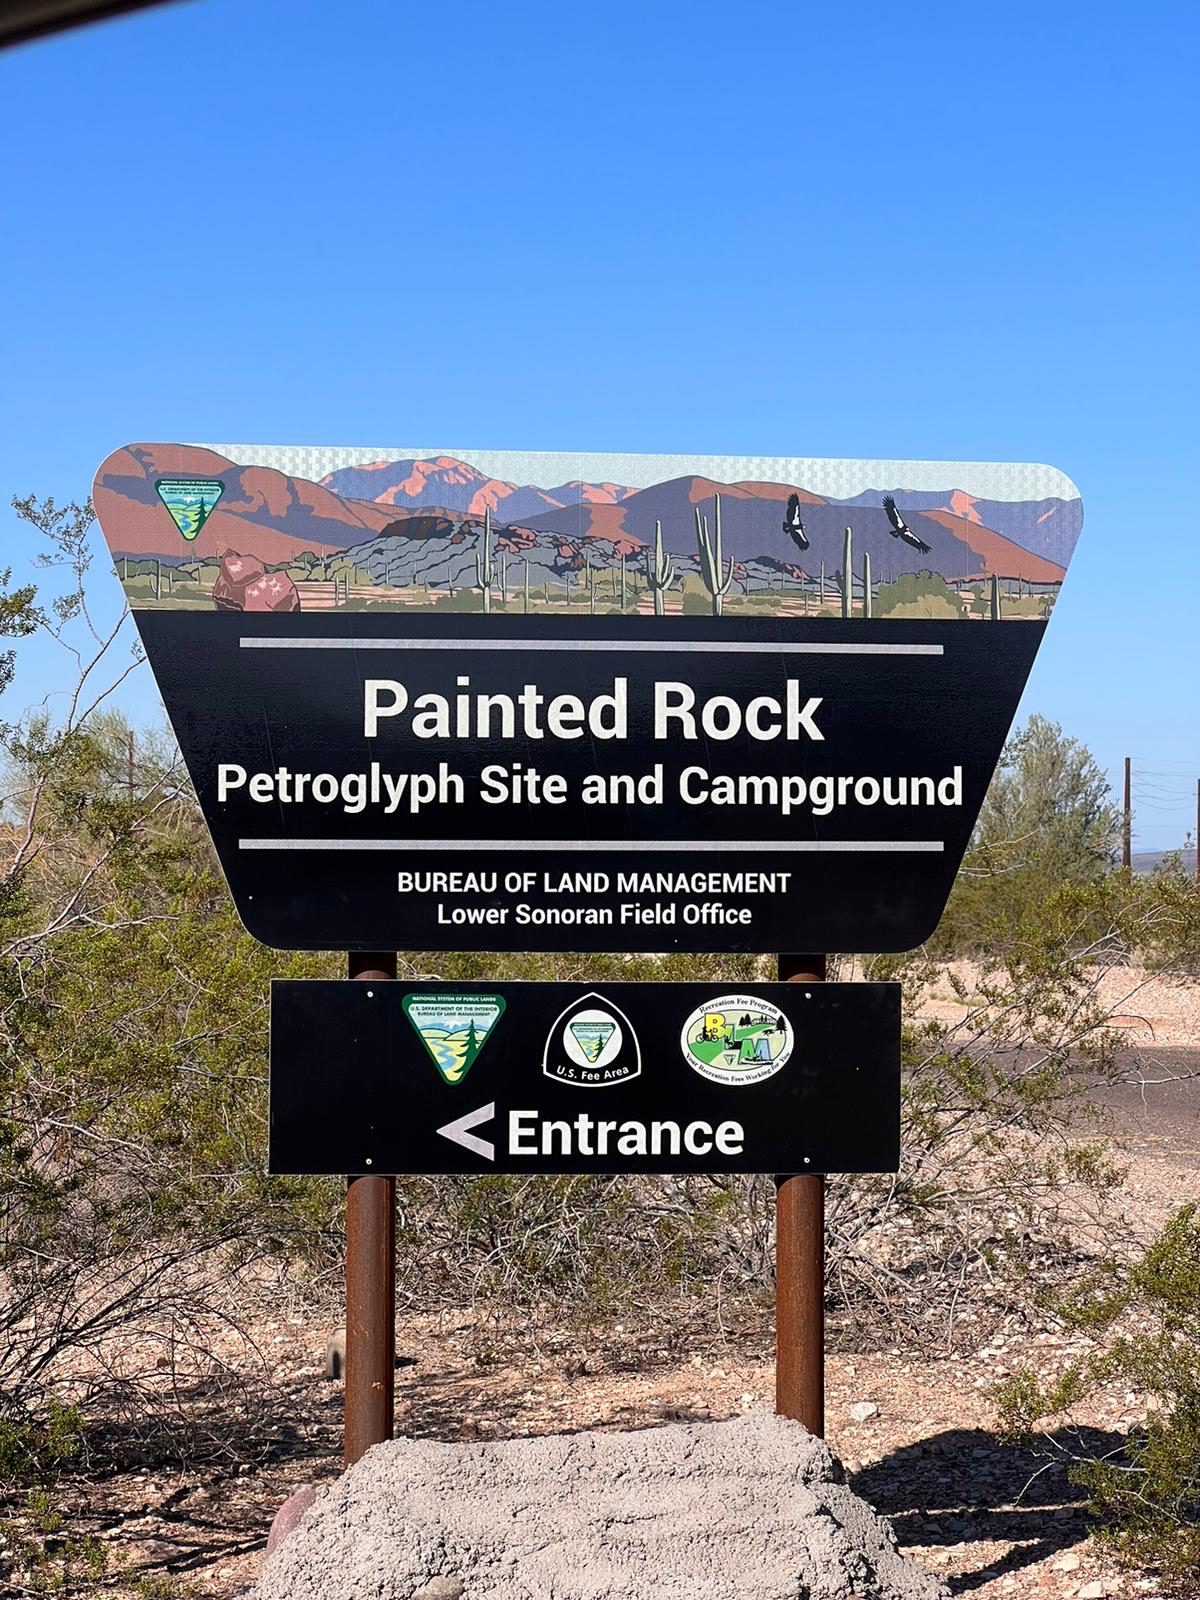 This image shows the official sign for the Painted Rock Petroglyph Site and Campground.